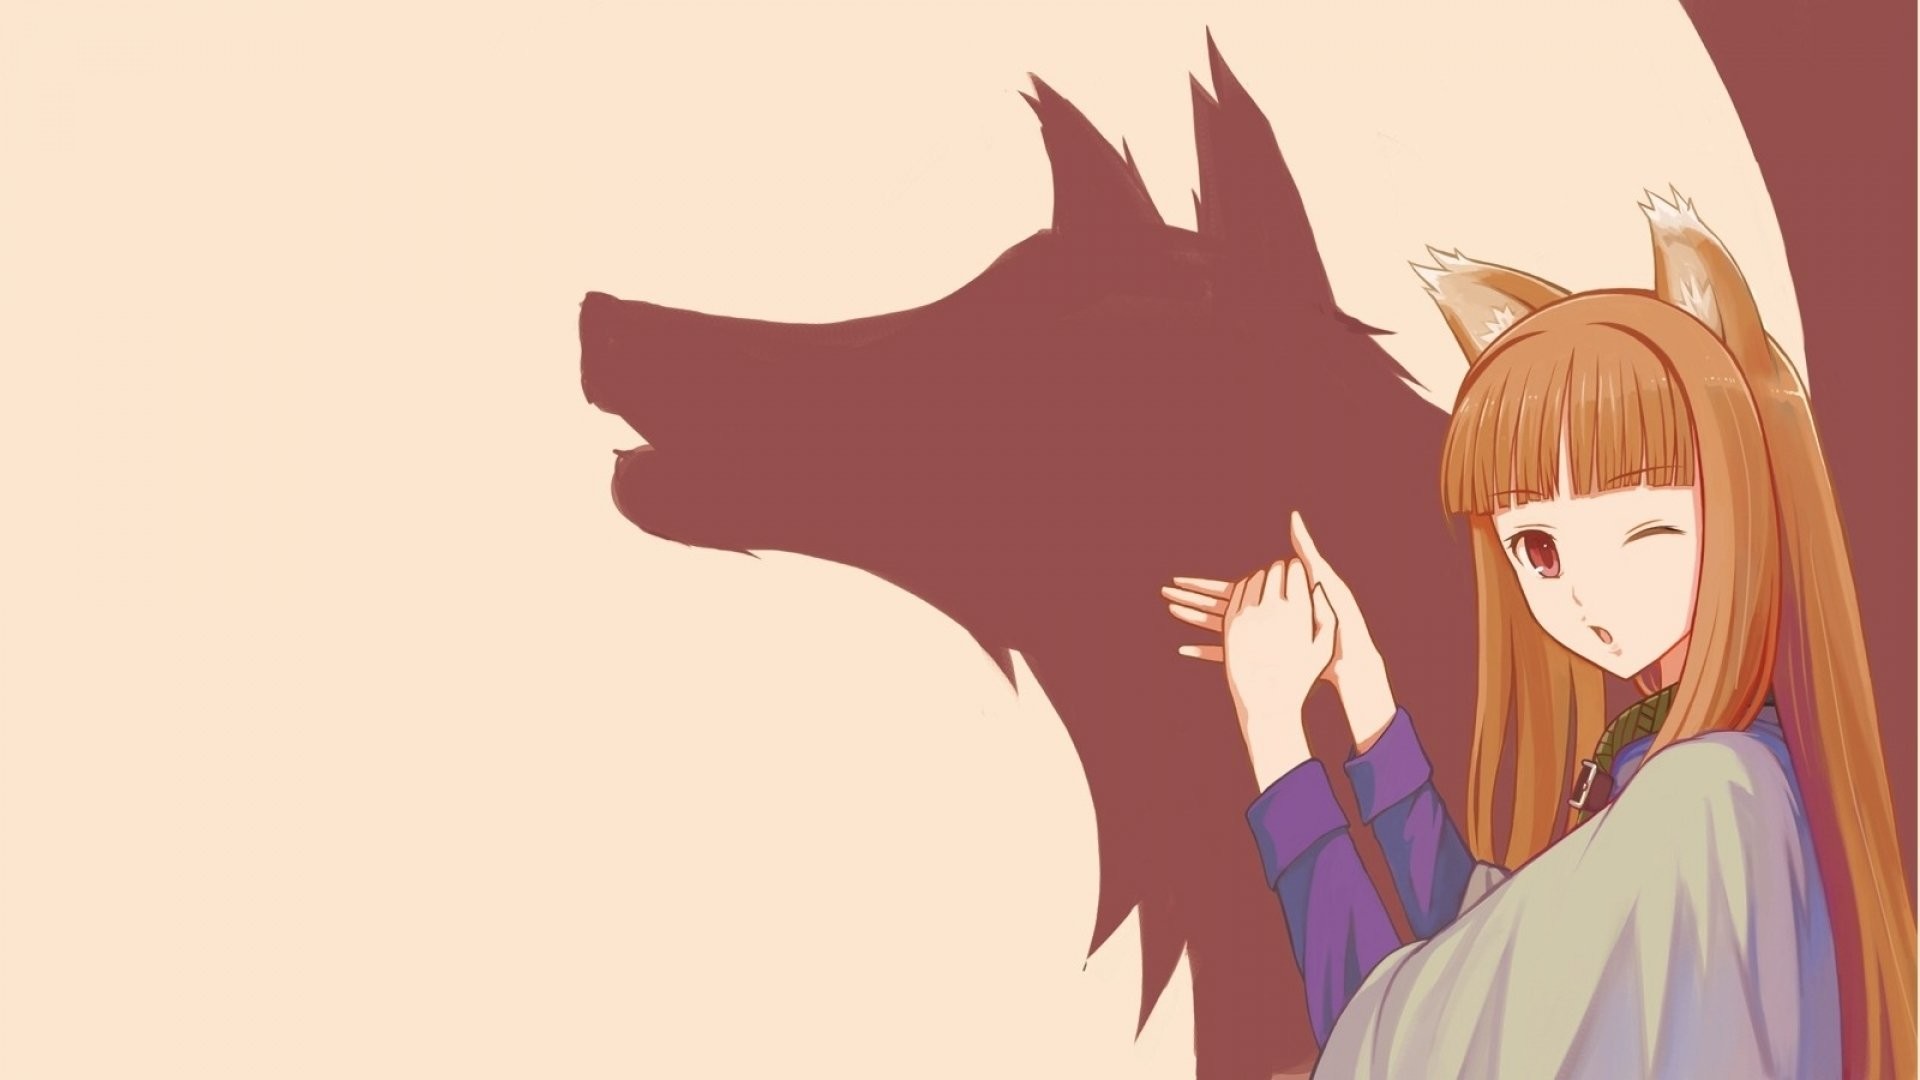 1920x1080 Anime - Spice and Wolf Wallpaper